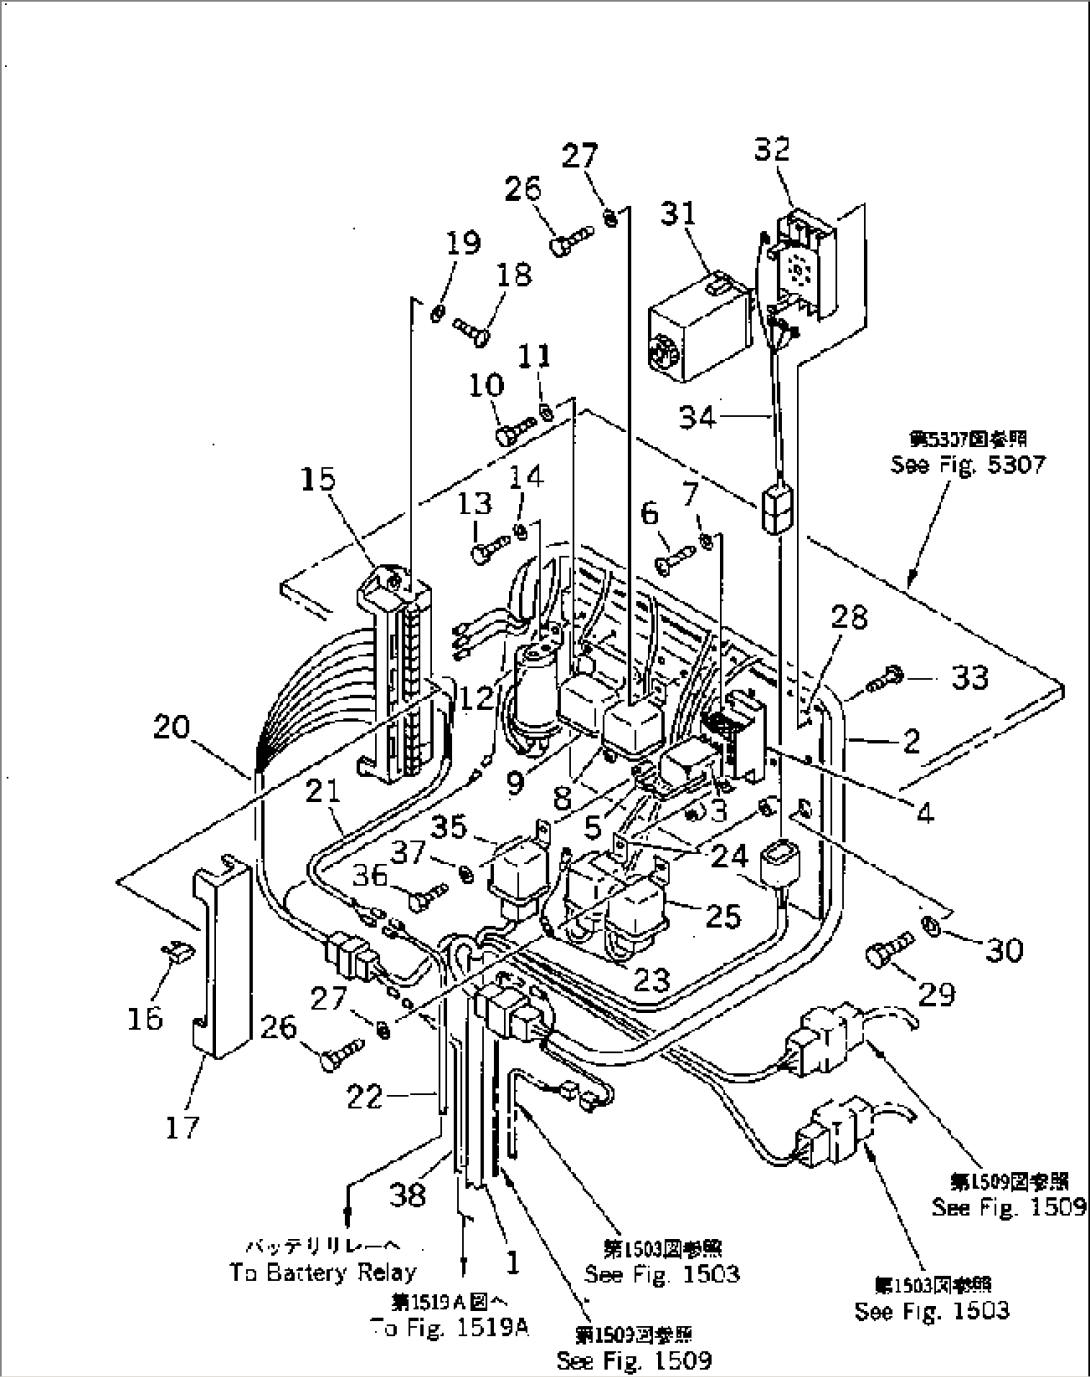 ELECTRICAL SYSTEM (RELAY BOX¤ L.H.)(#10003-)